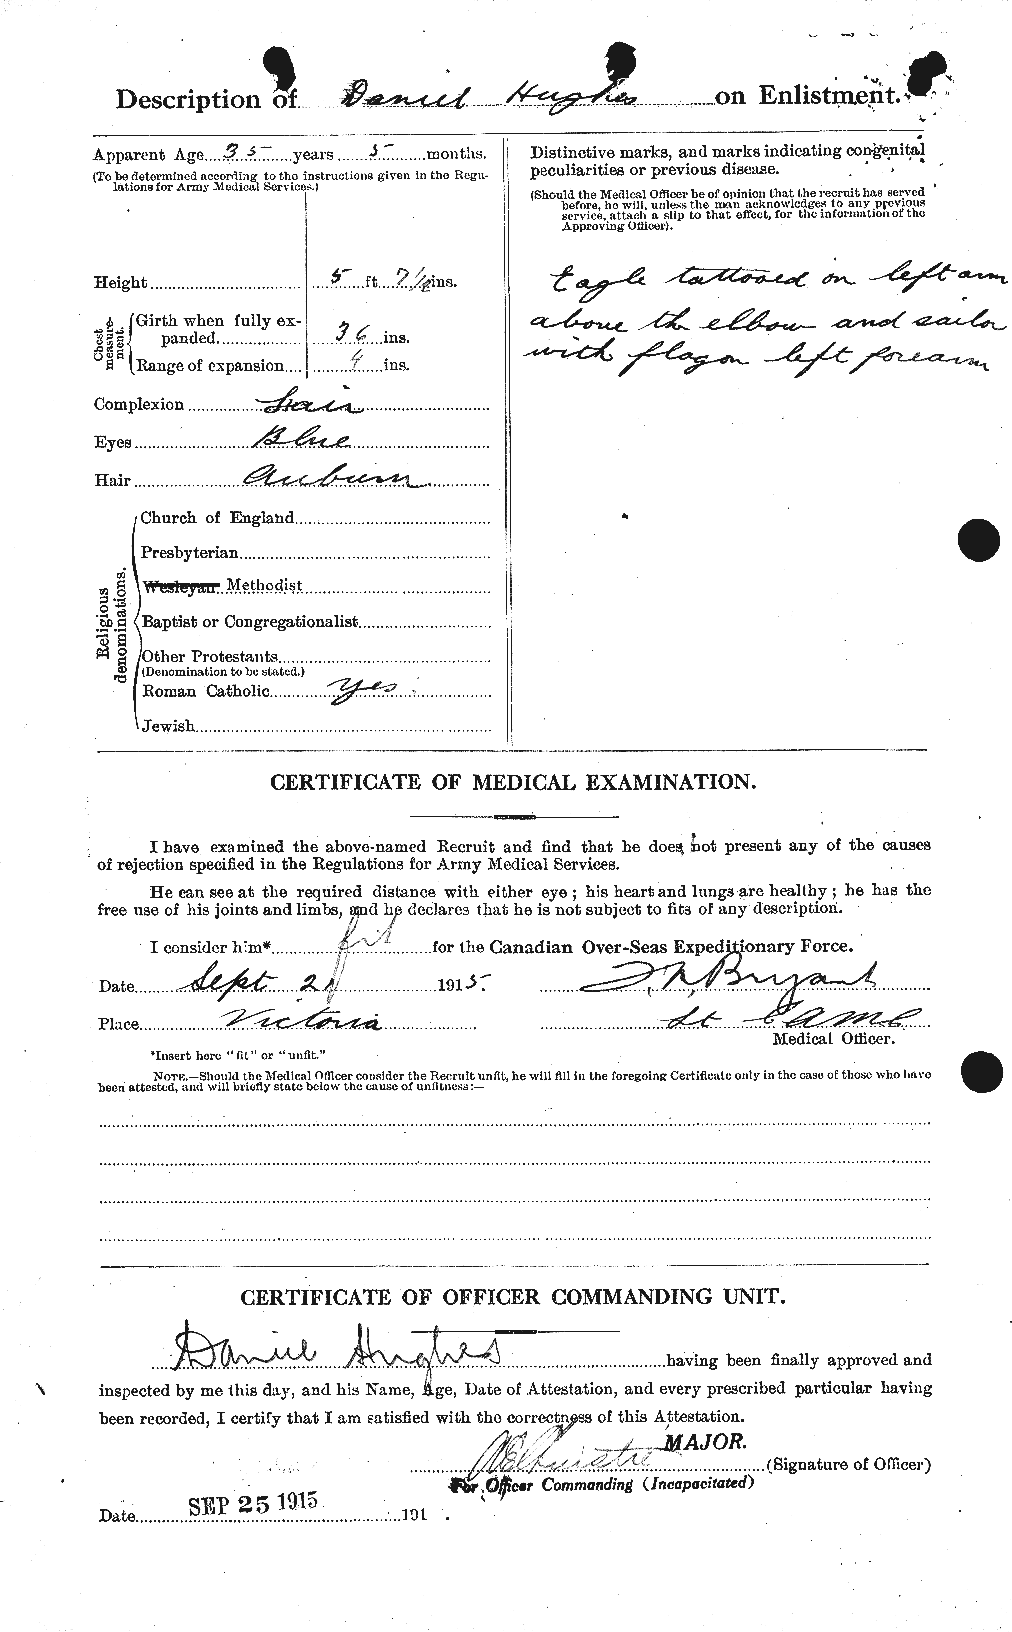 Personnel Records of the First World War - CEF 402642b